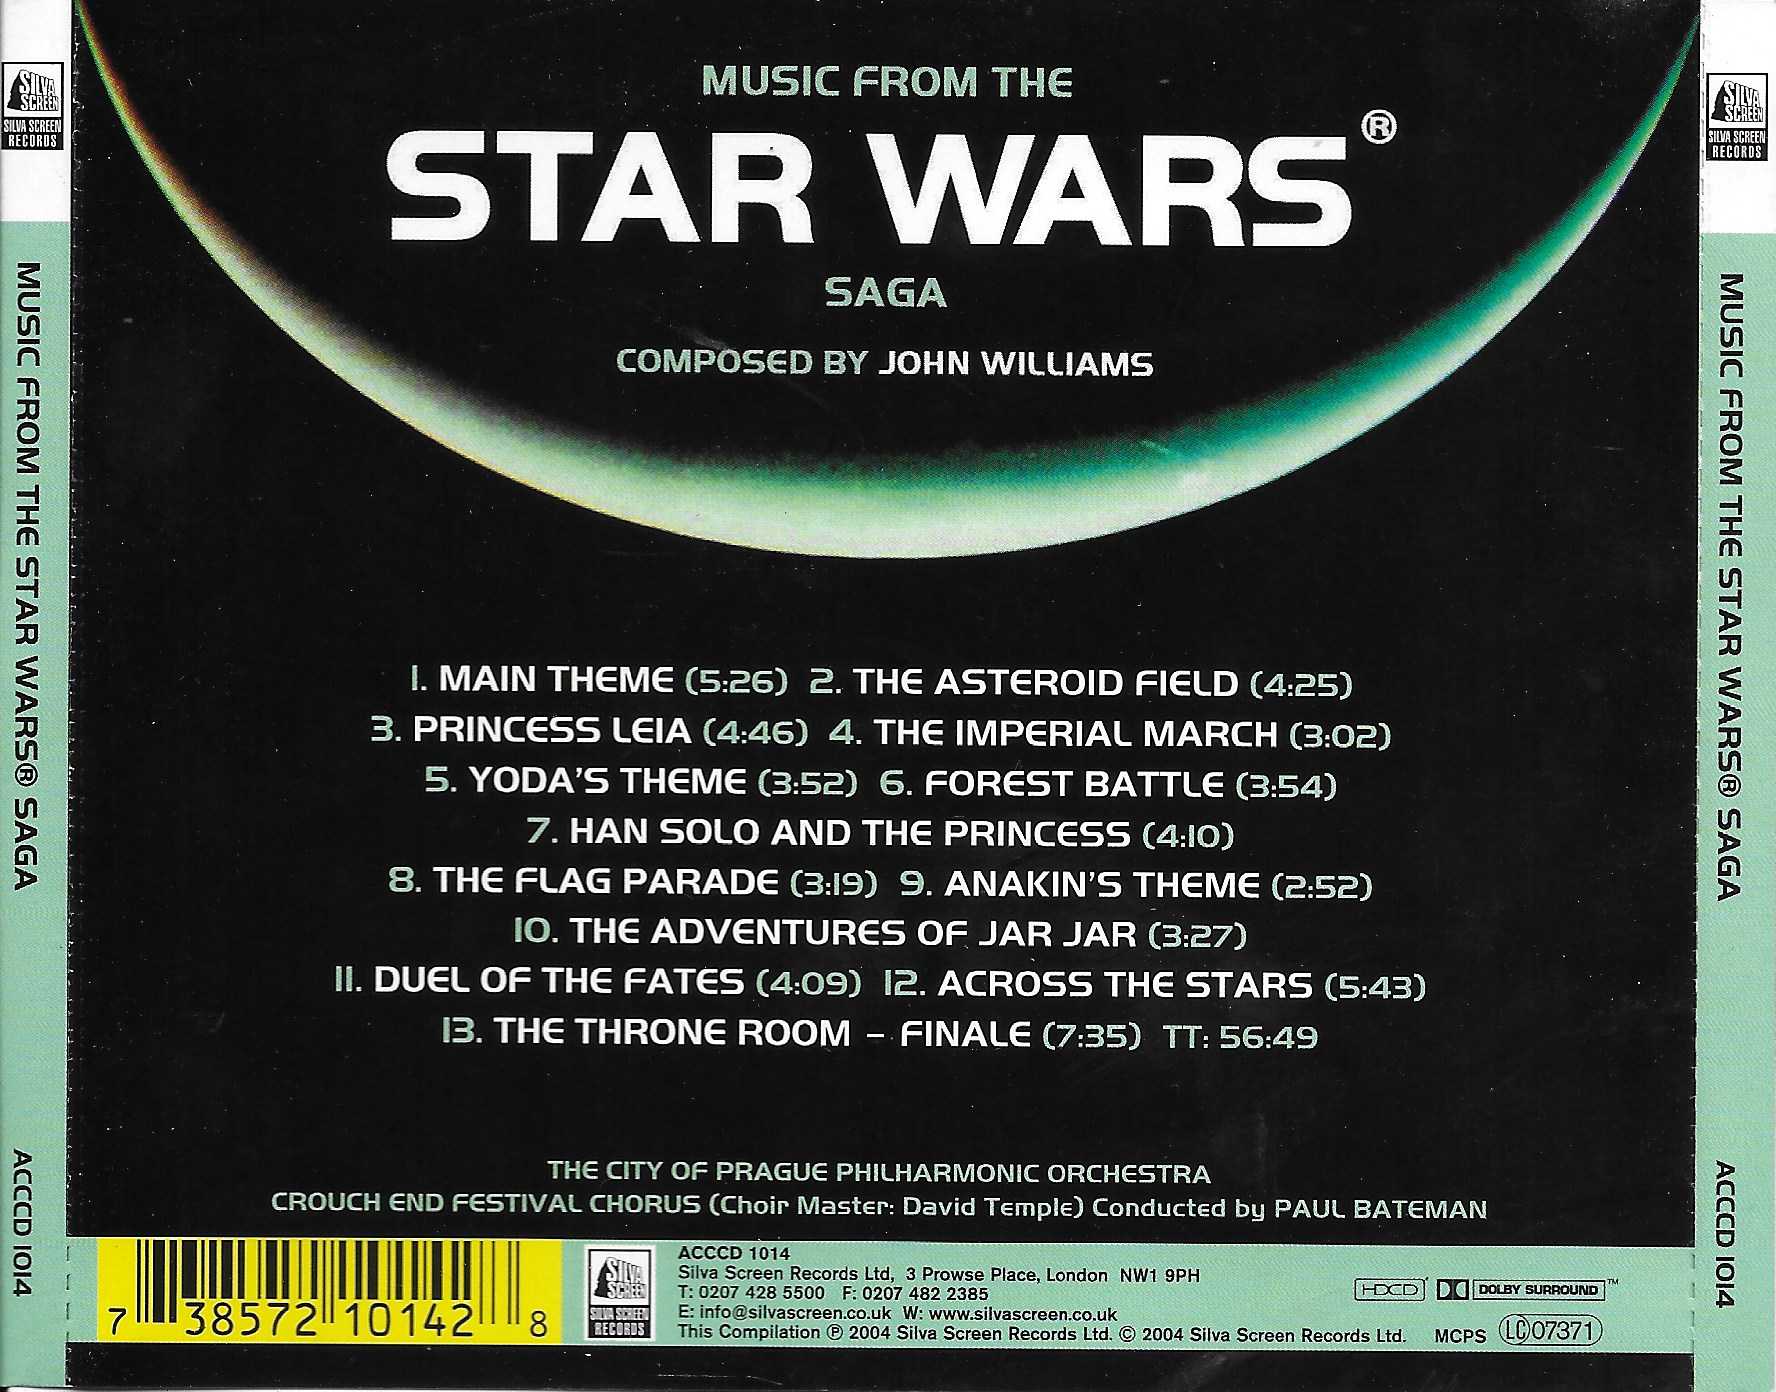 Picture of ACCCD 1014 Music from the Star Wars saga by artist John Williams from ITV, Channel 4 and Channel 5 library